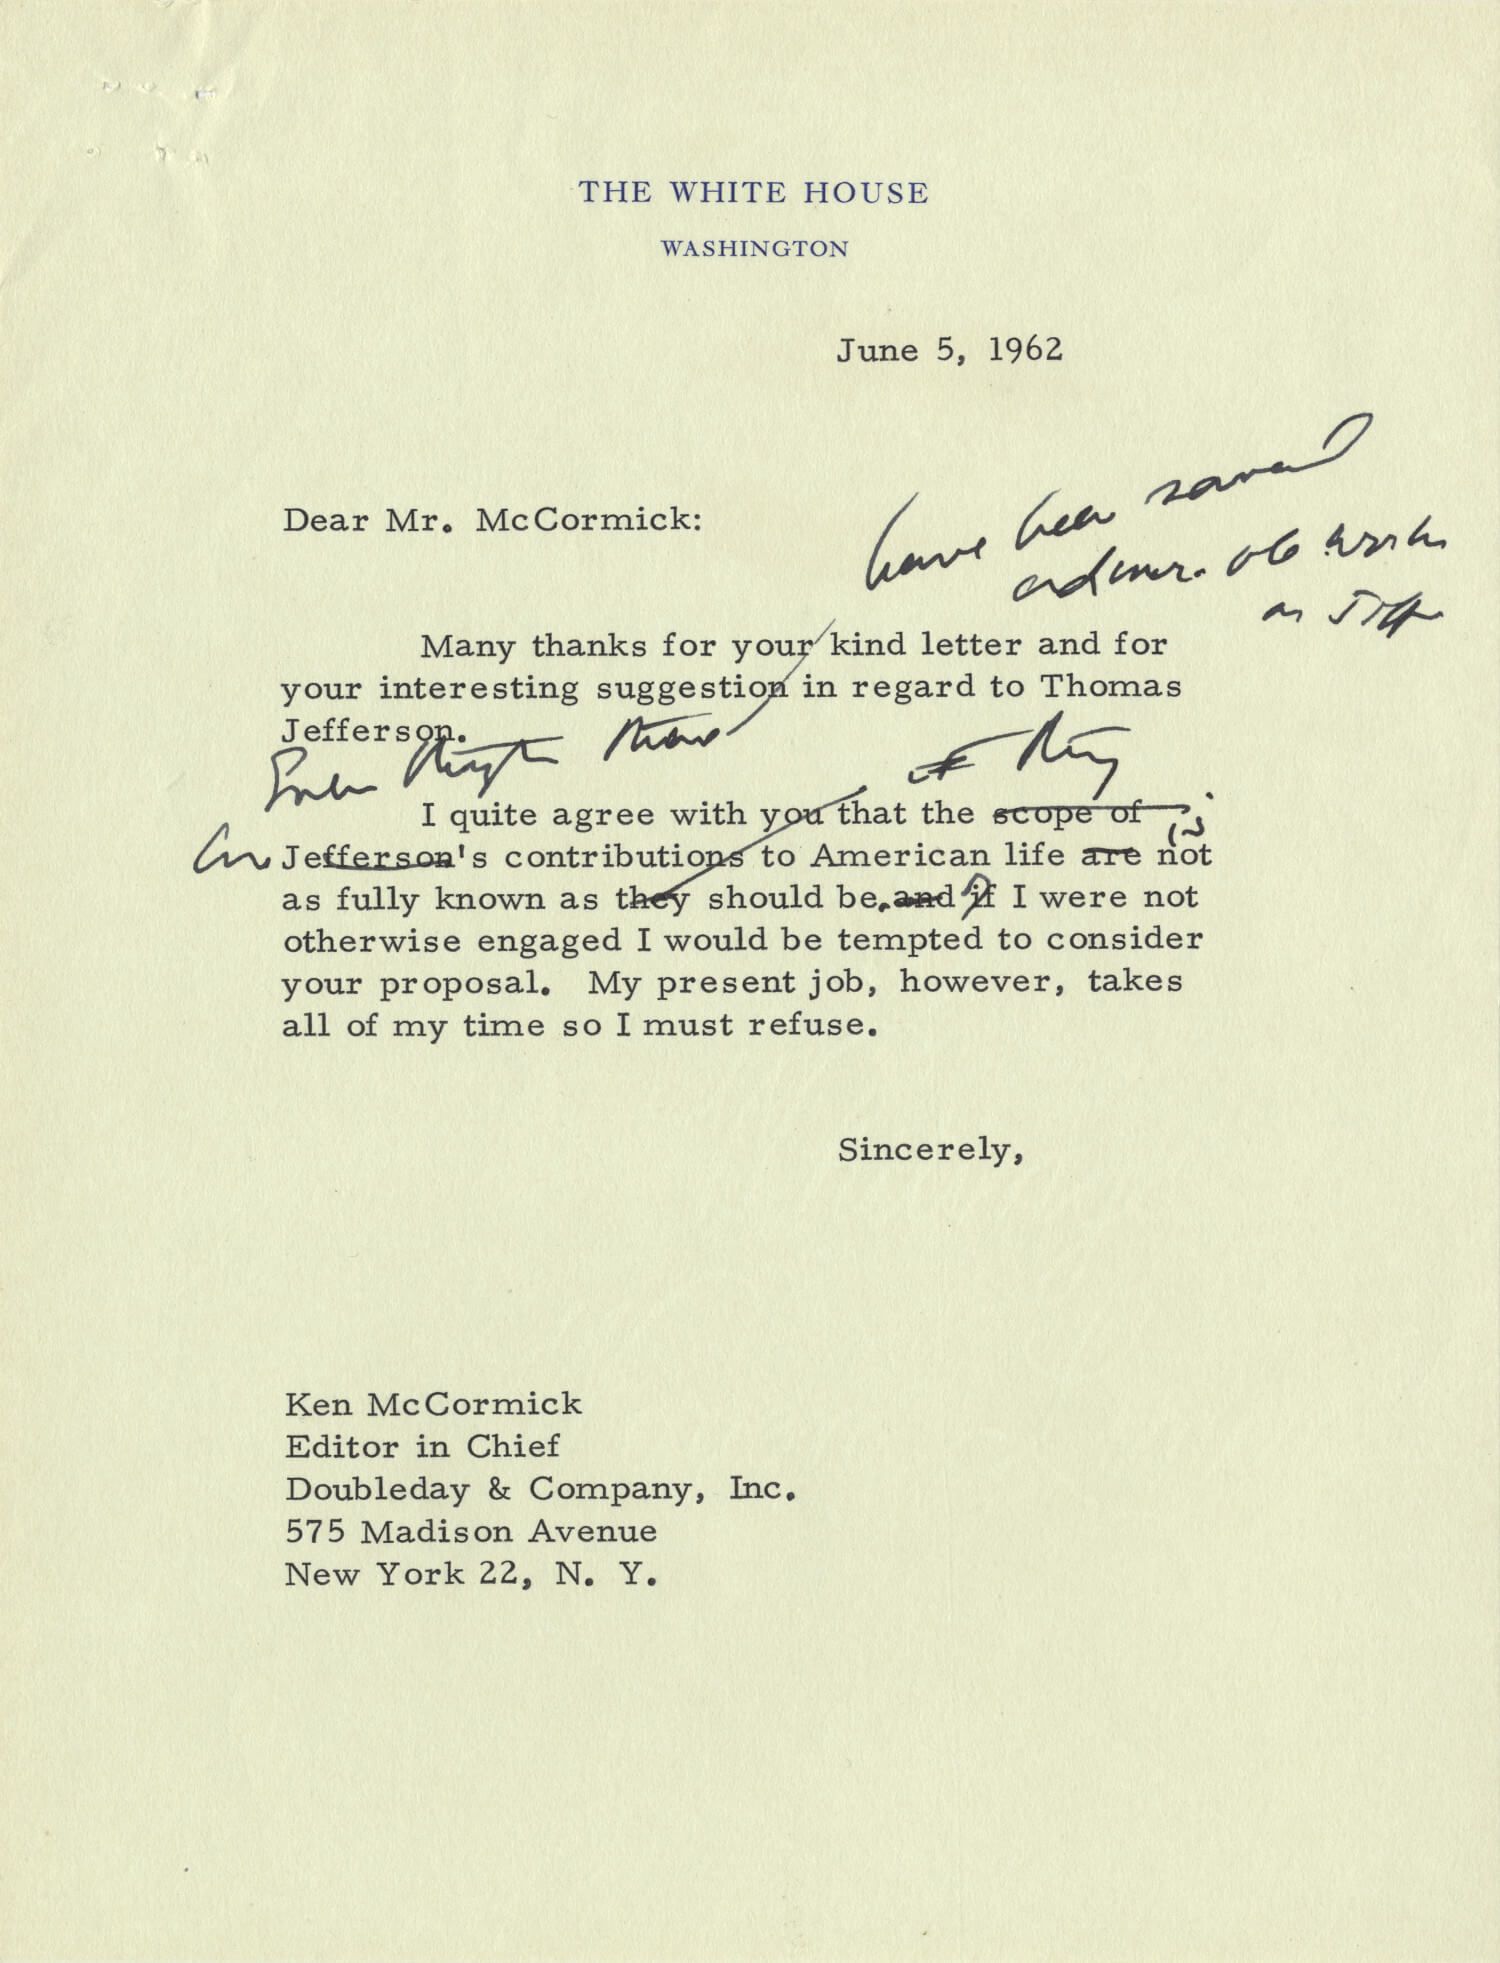 President John F. Kennedy Polishes a Letter Declining to Write a Book on Thomas Jefferson 